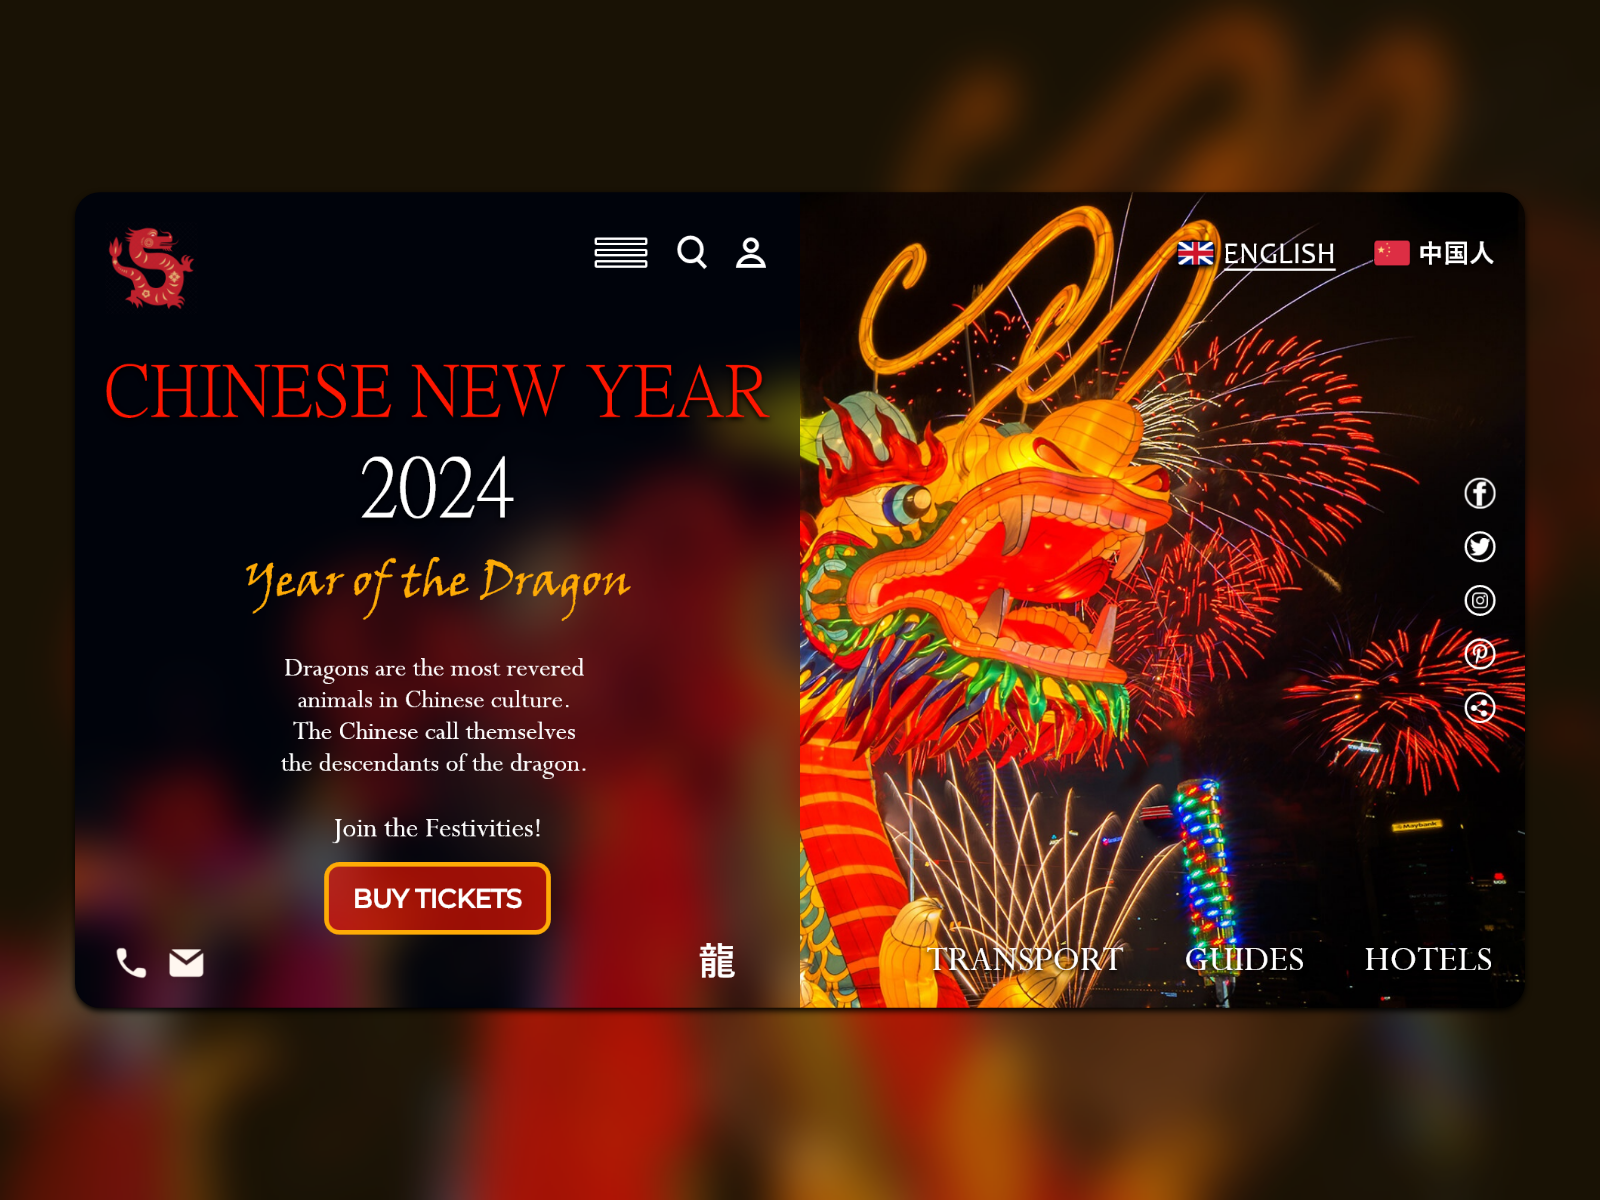 Chinese New Year 2024 Year of the Dragon by Anush Raghavender on Dribbble